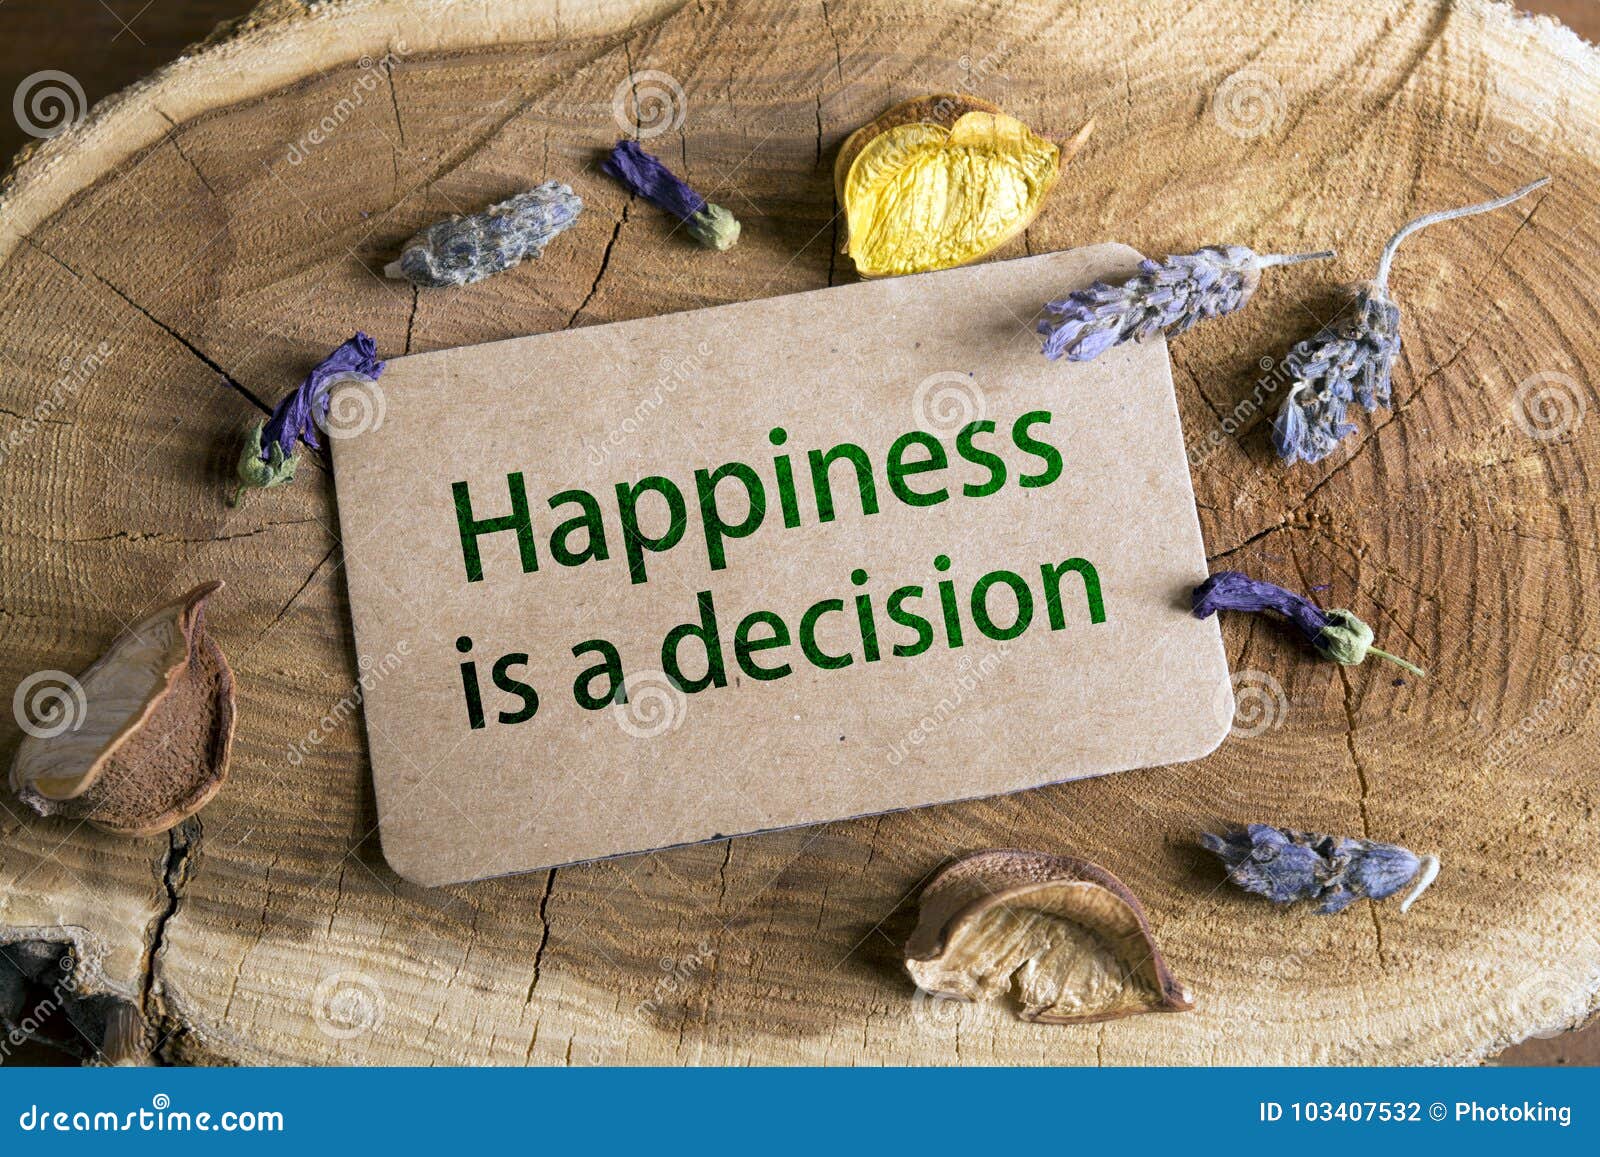 happiness is a decision